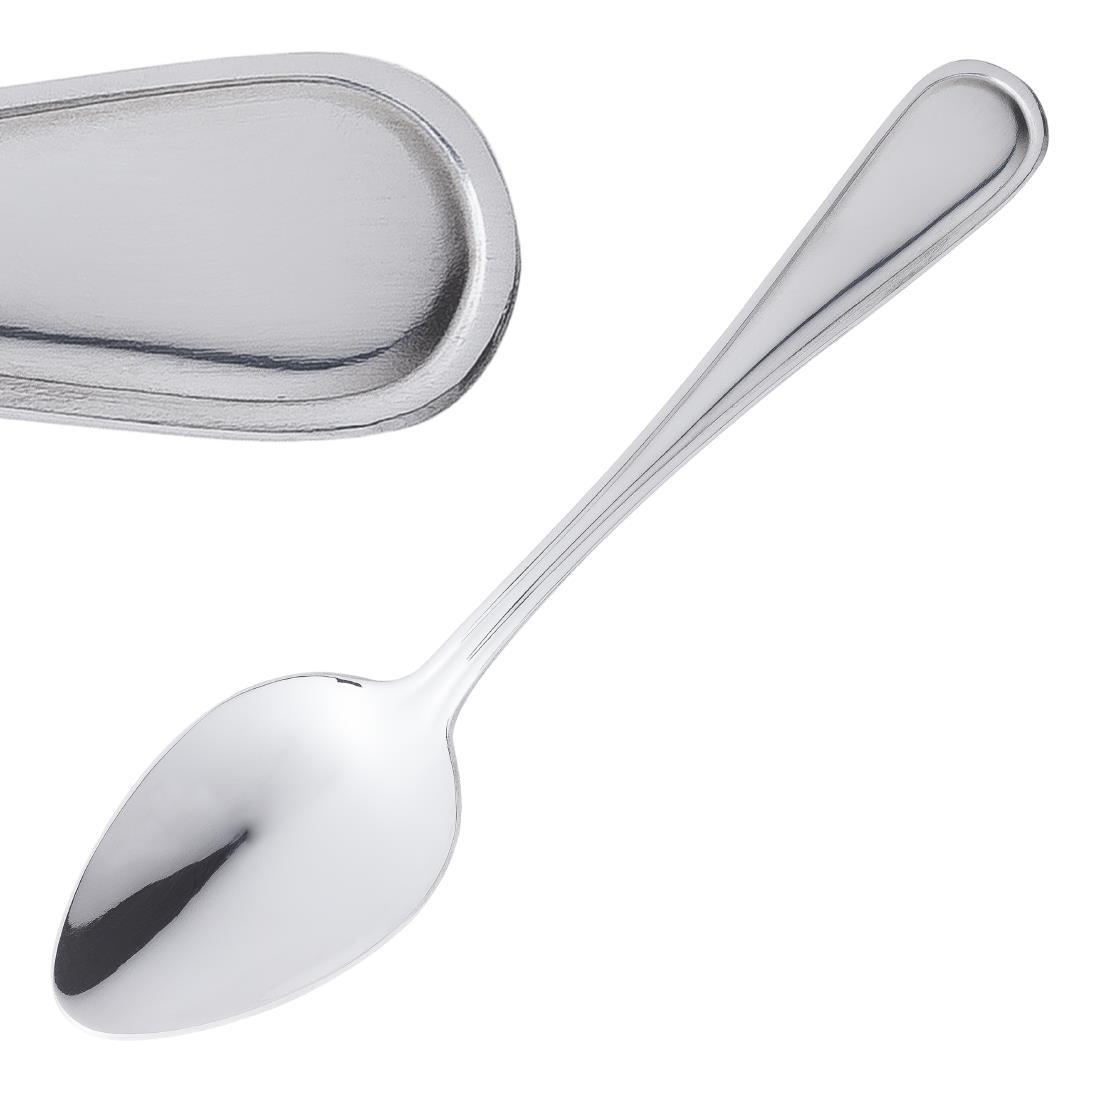 Olympia Mayfair Service Spoon (Pack of 12) - D509  - 1